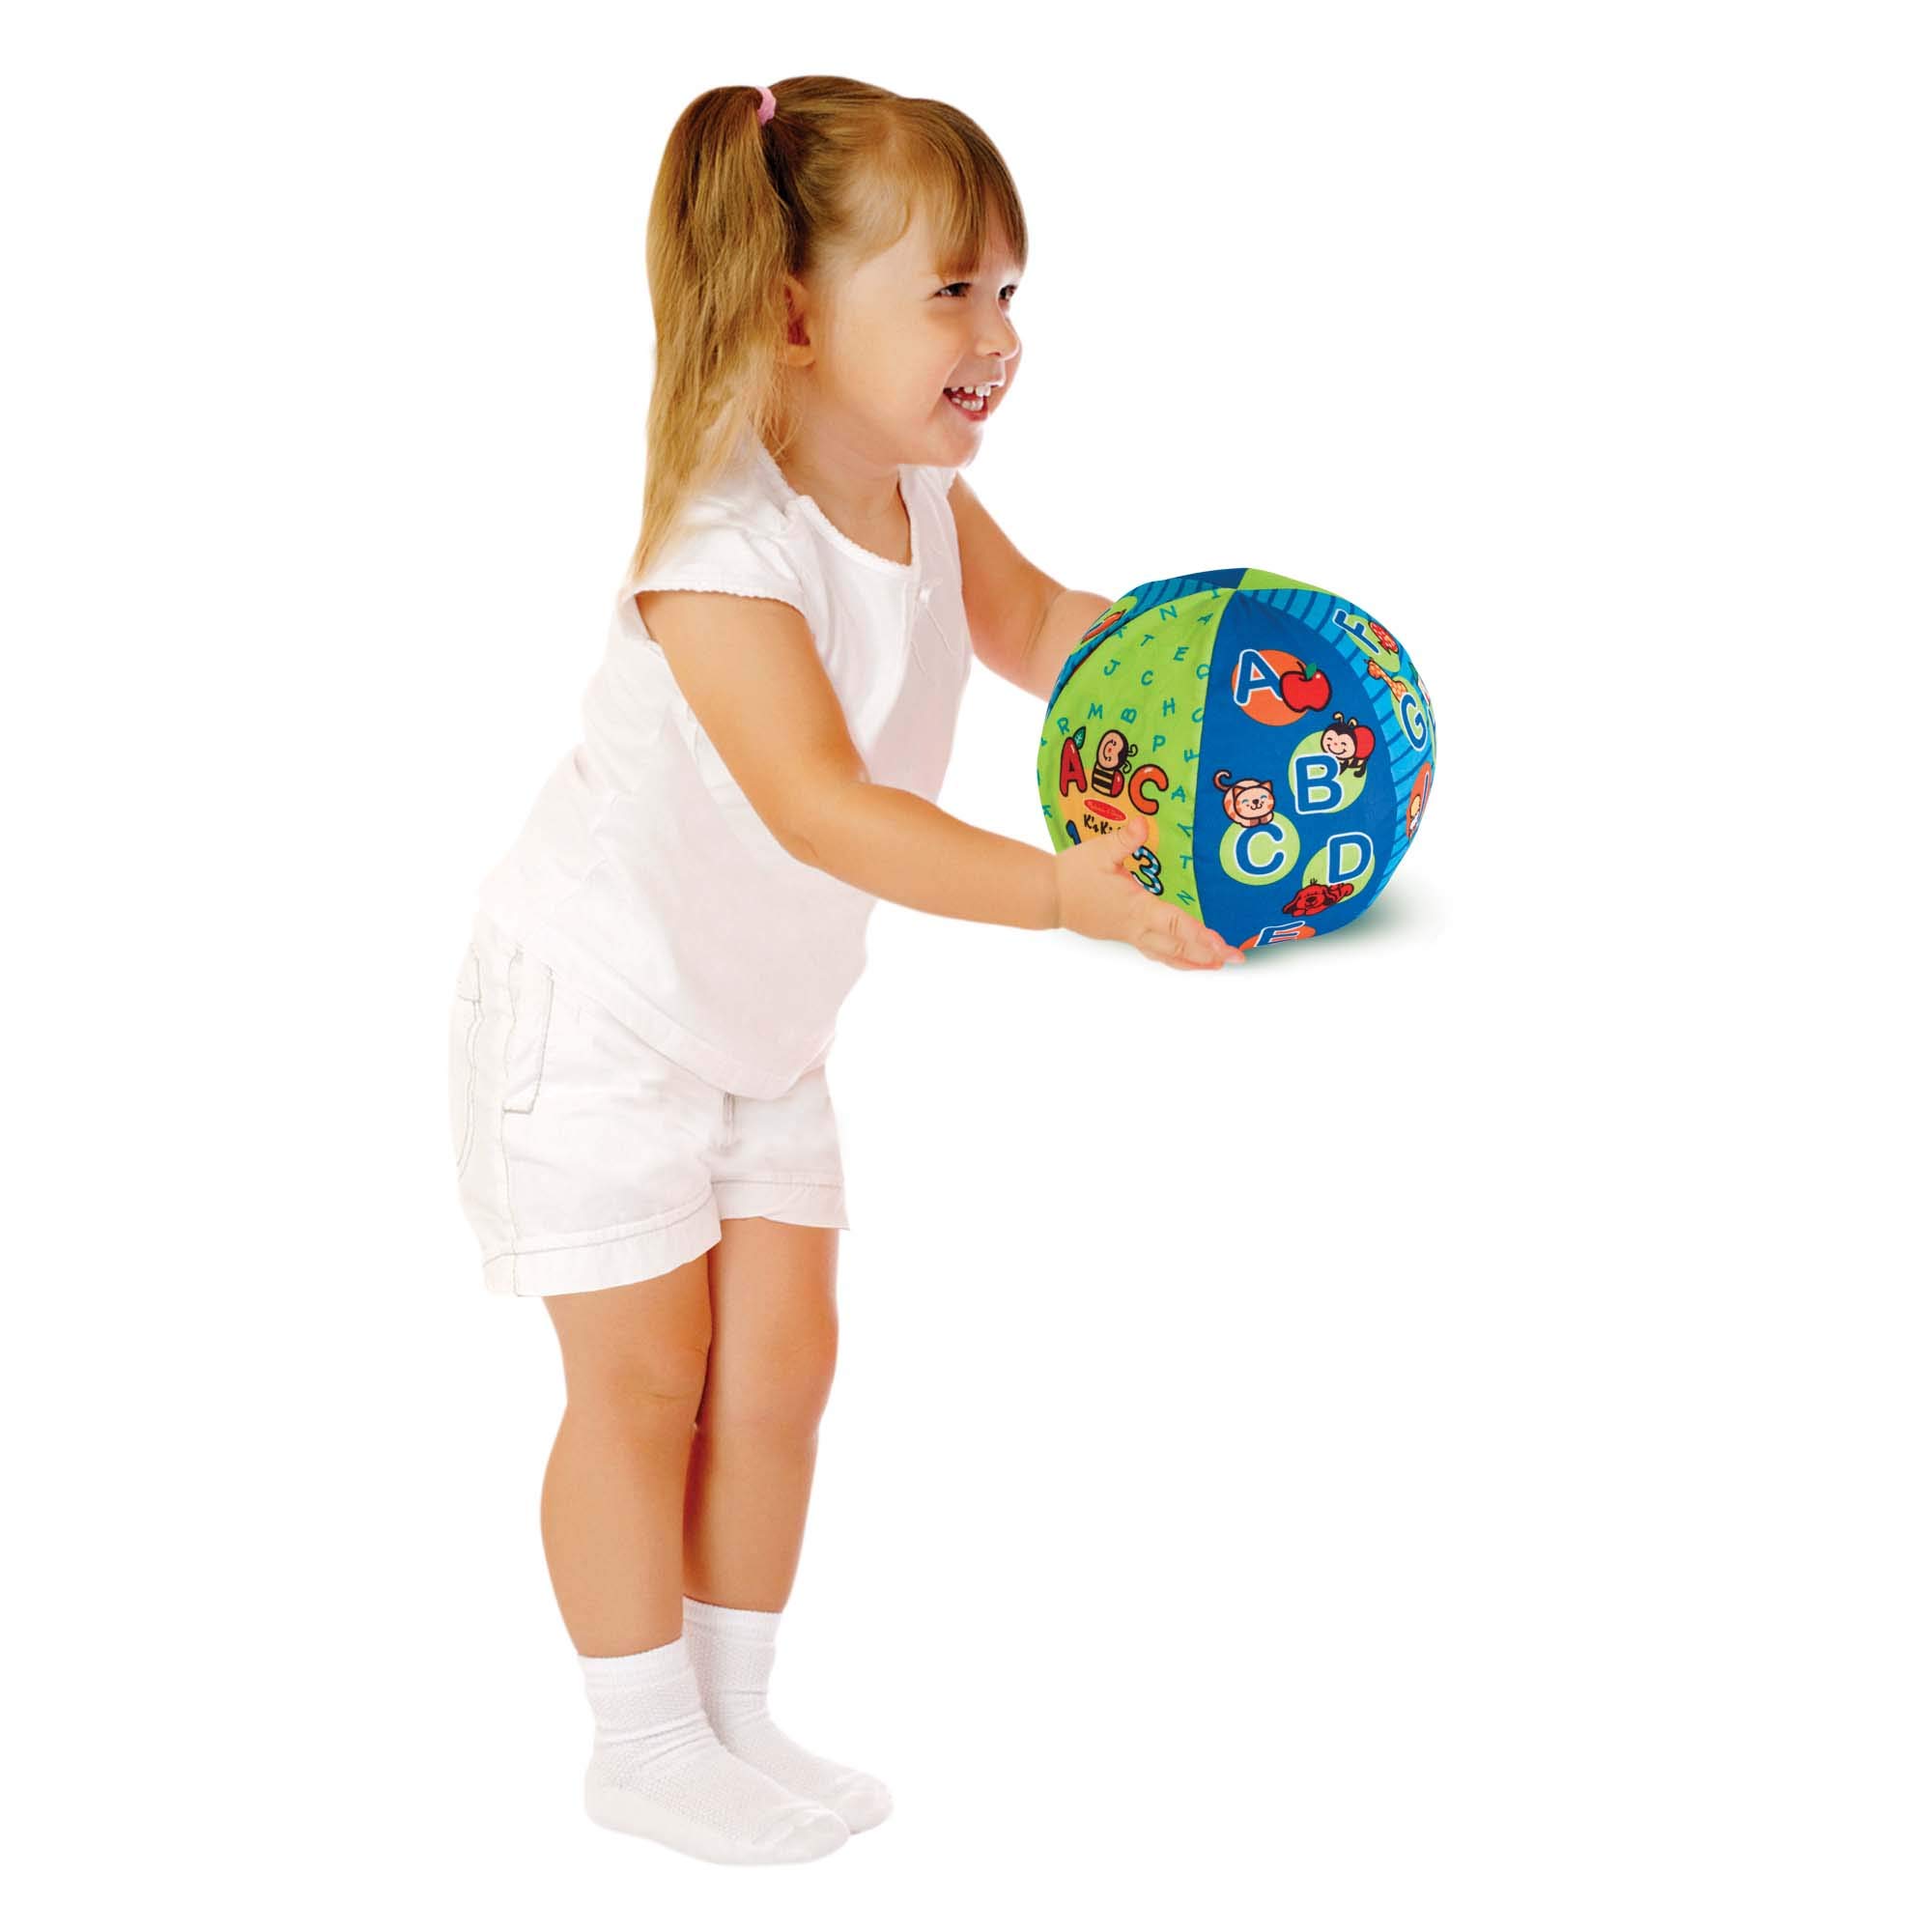 Melissa & Doug K's Kids 2-in-1 Talking Ball Educational Toy - ABCs and Counting 1-10